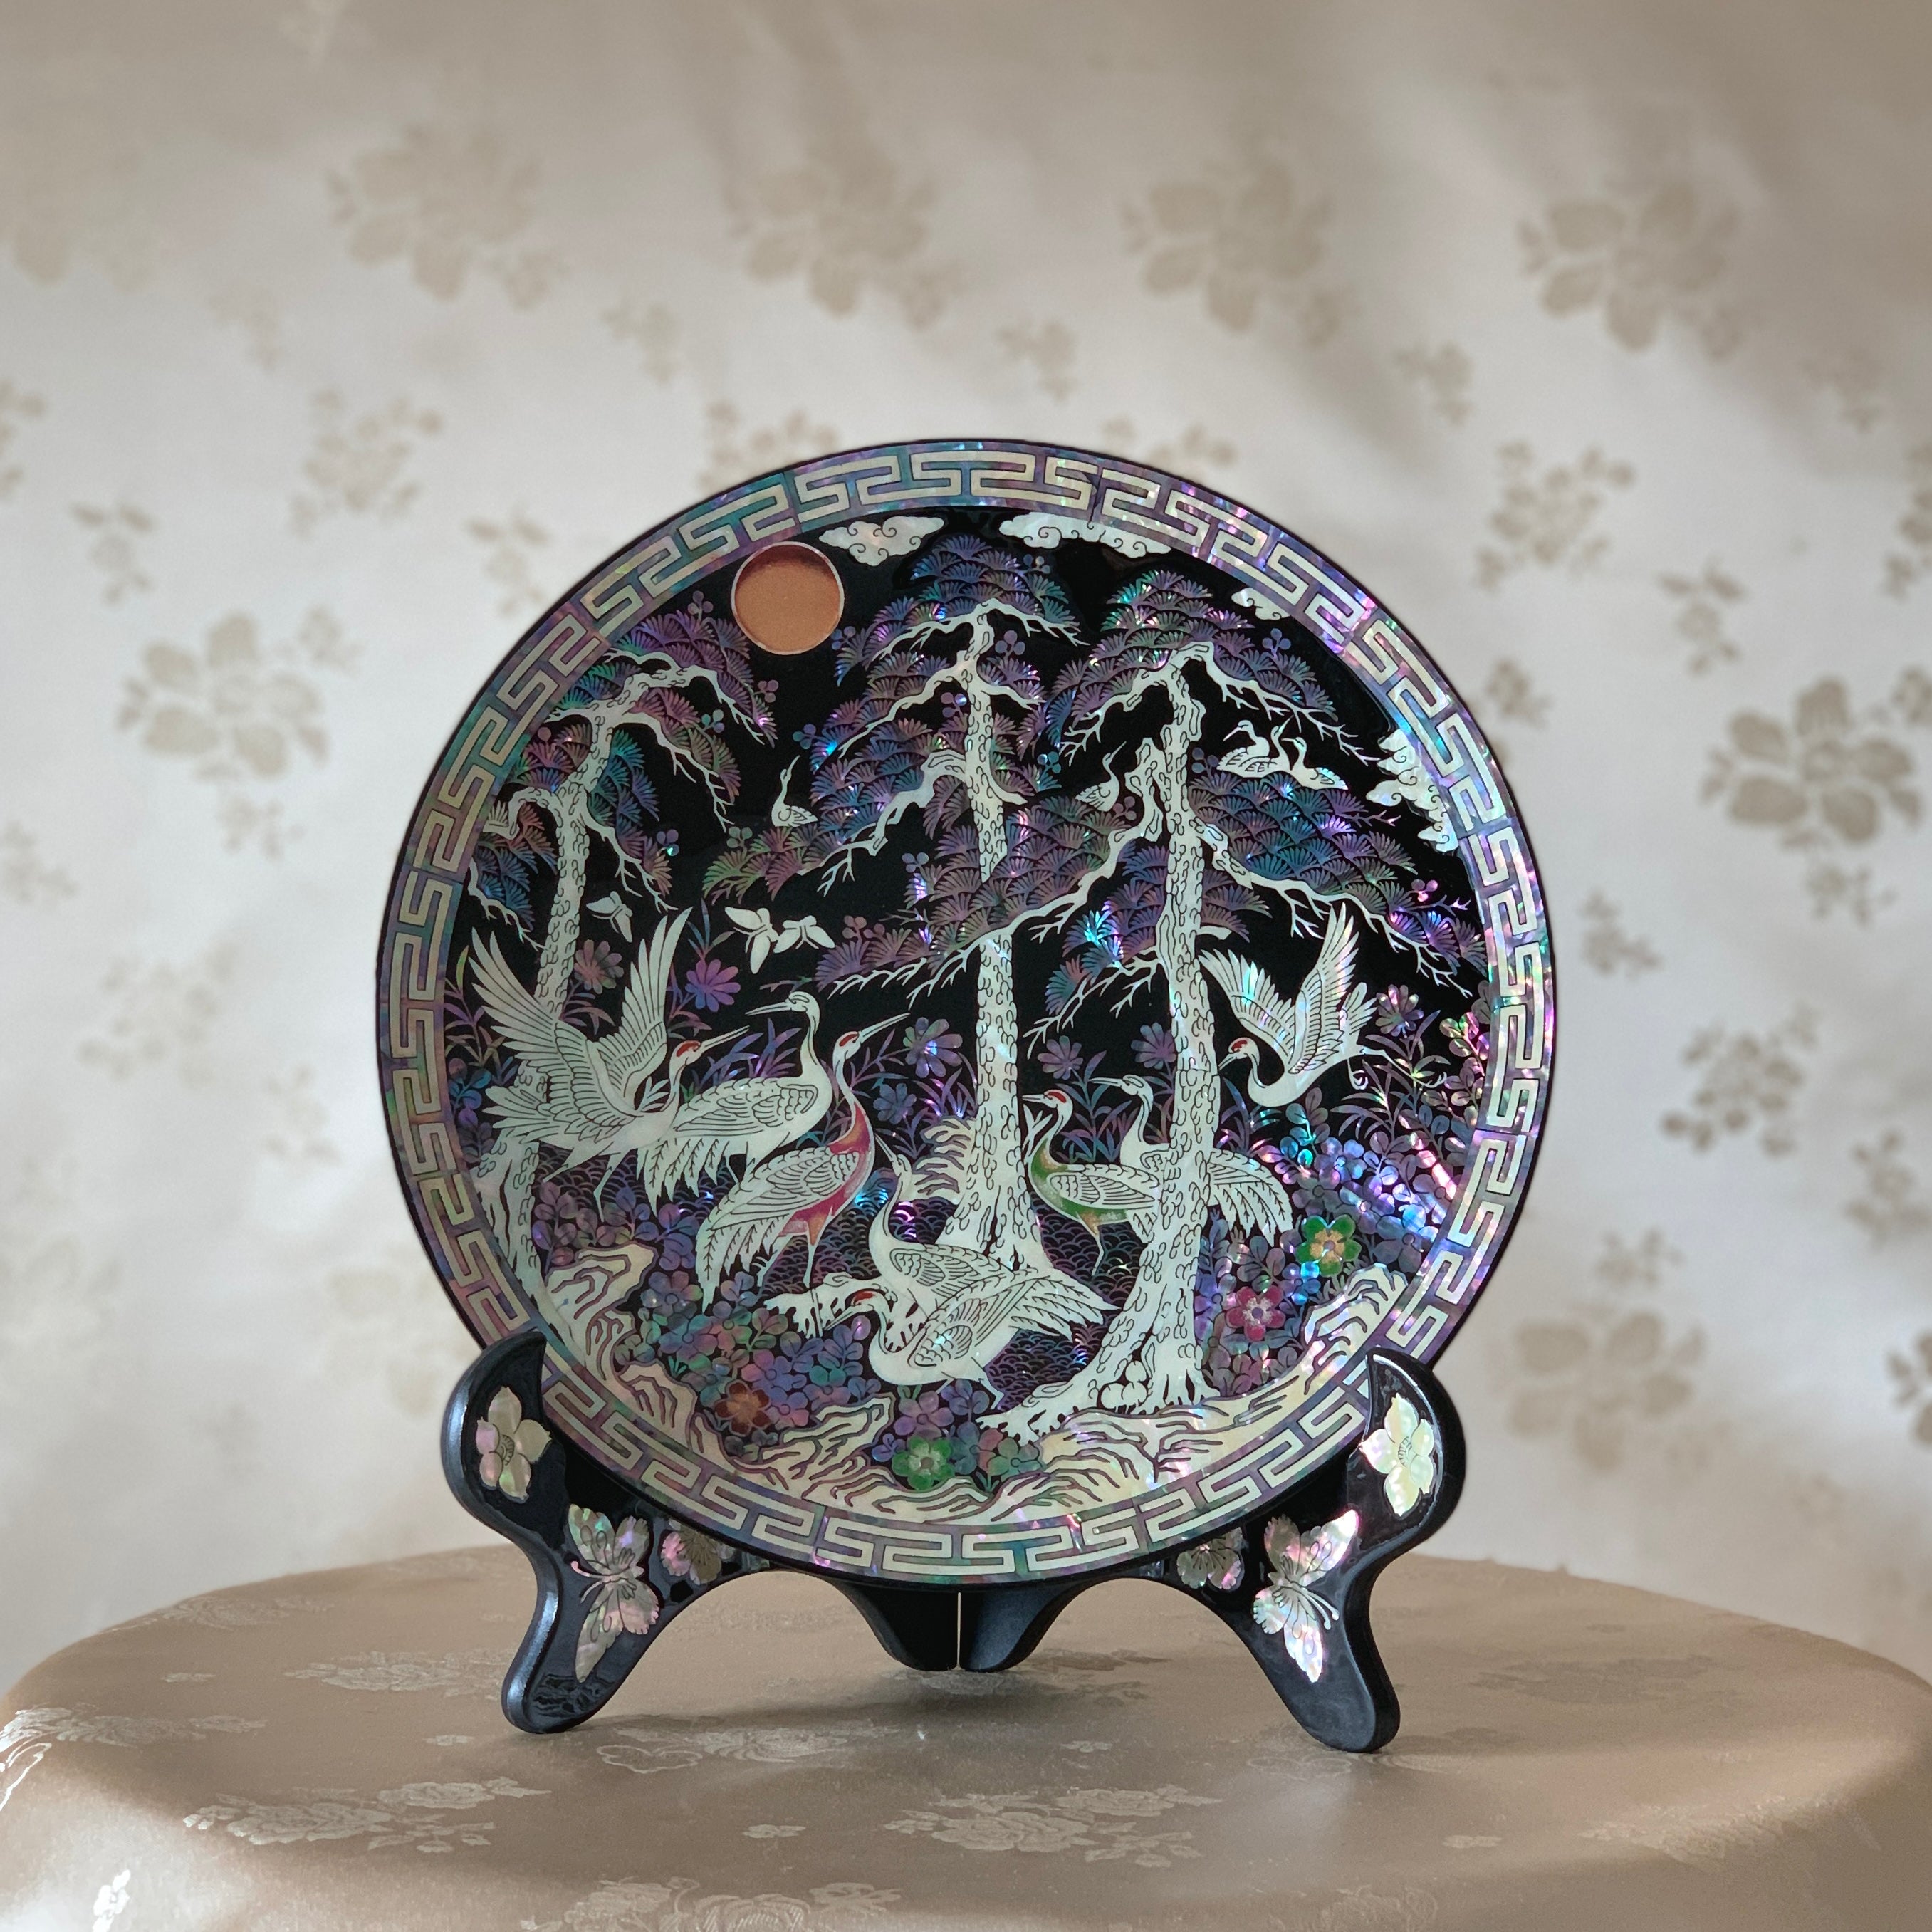 Handcrafted 자개 송학문 접시: A masterpiece of Korean art featuring natural mother of pearl and lacquer, showcasing the ancient najeon chilgi technique.